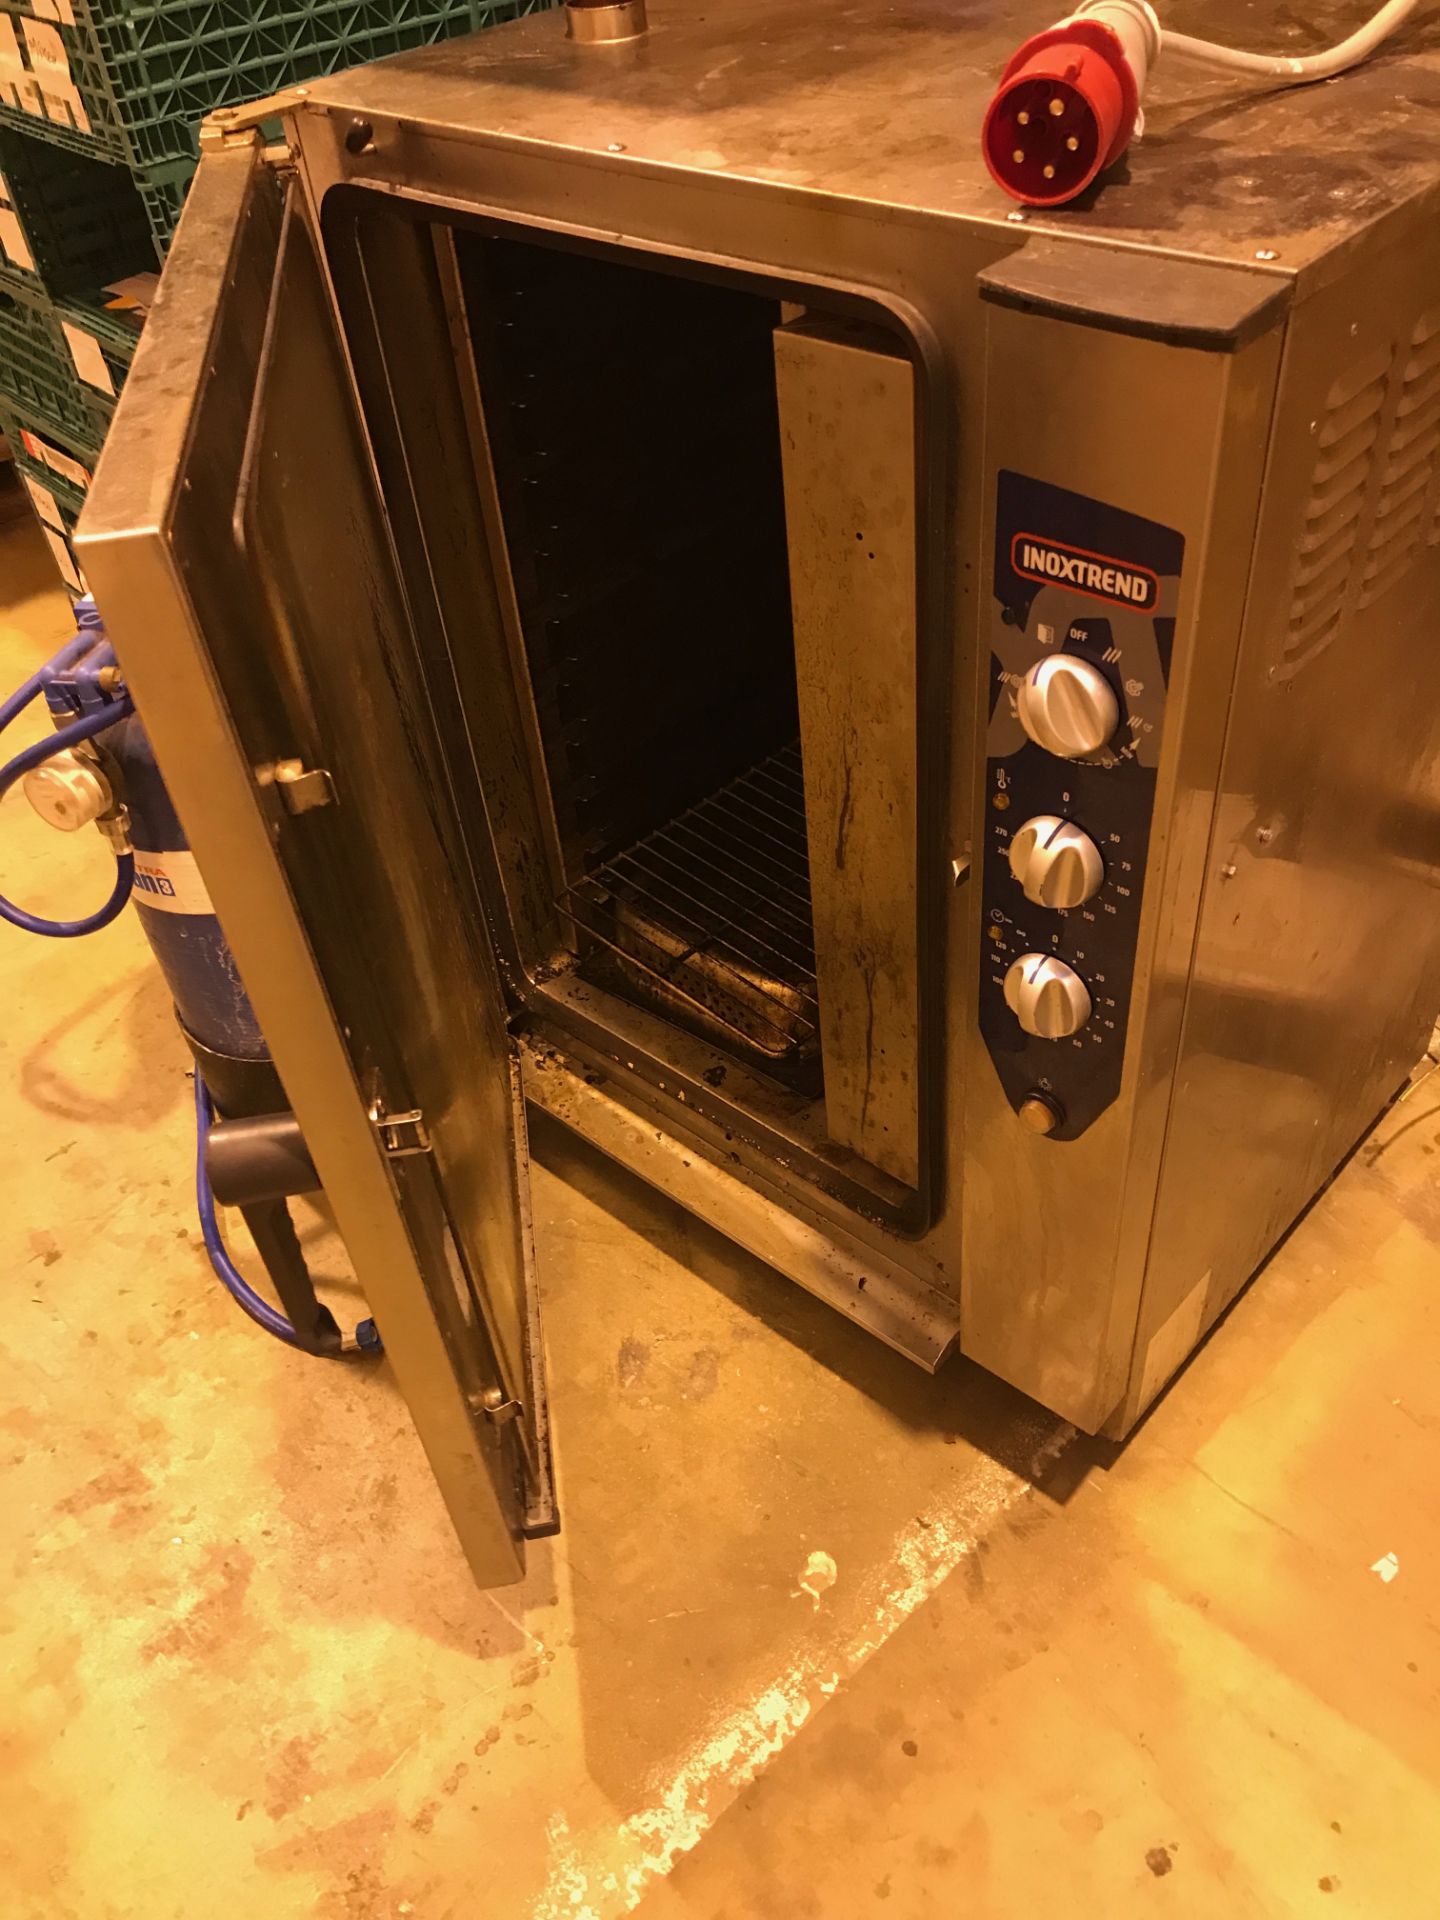 Inoxtrend - Glass Fronted Combination Oven - Electric with Water Filter - Image 8 of 10